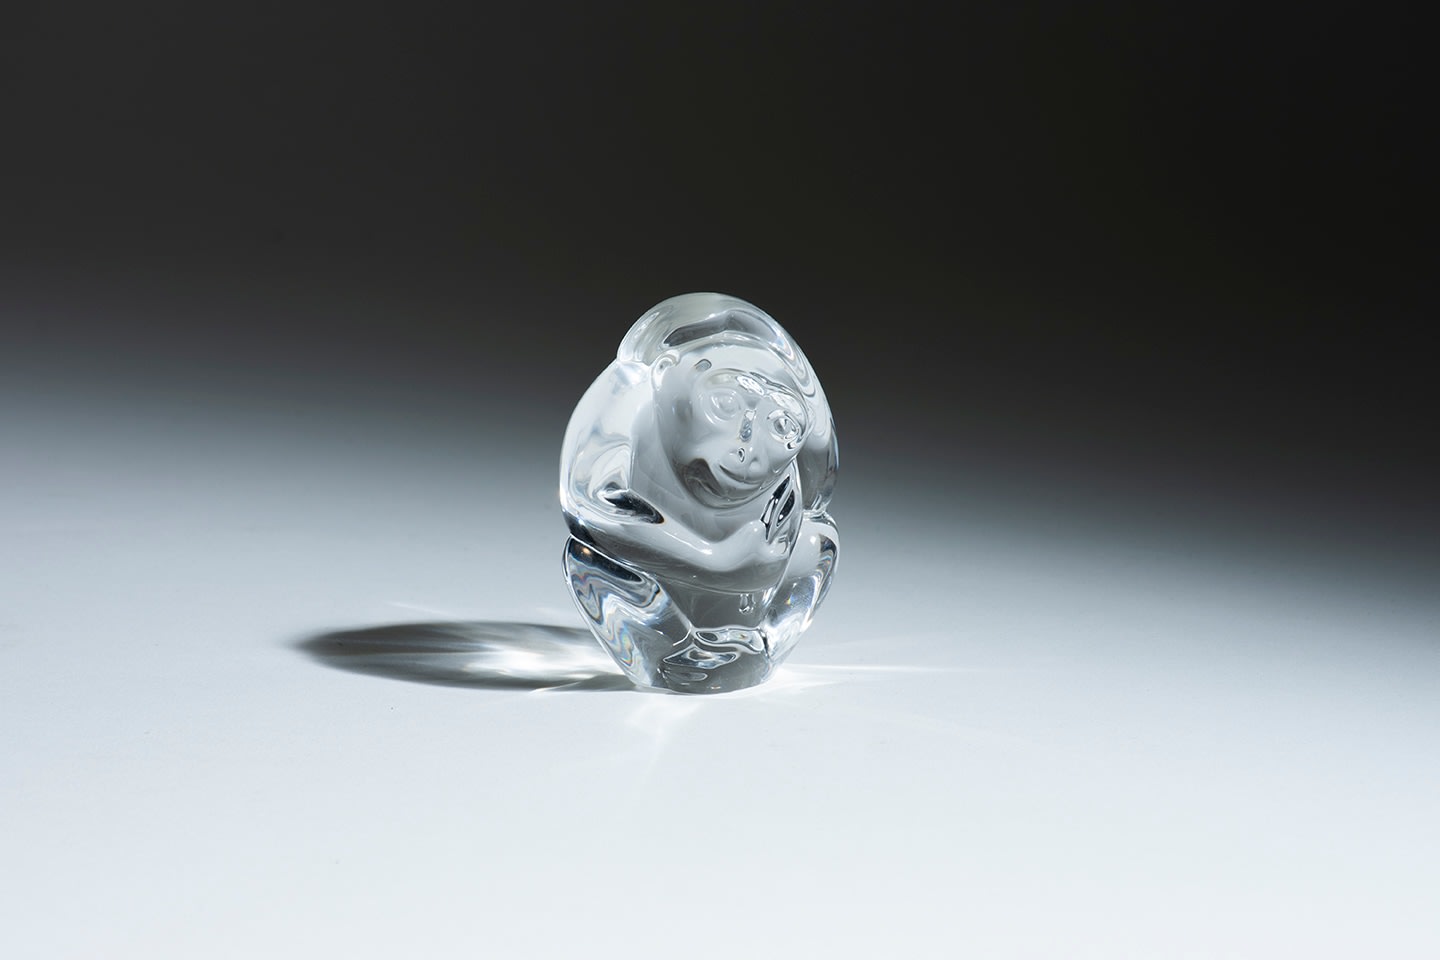 a small oval shaped sculpture in clear highly refractive crystal in the shape of a monkey, symbolizing cleverness, by american glass company steuben, meant to be held in the hand to cool down the palms